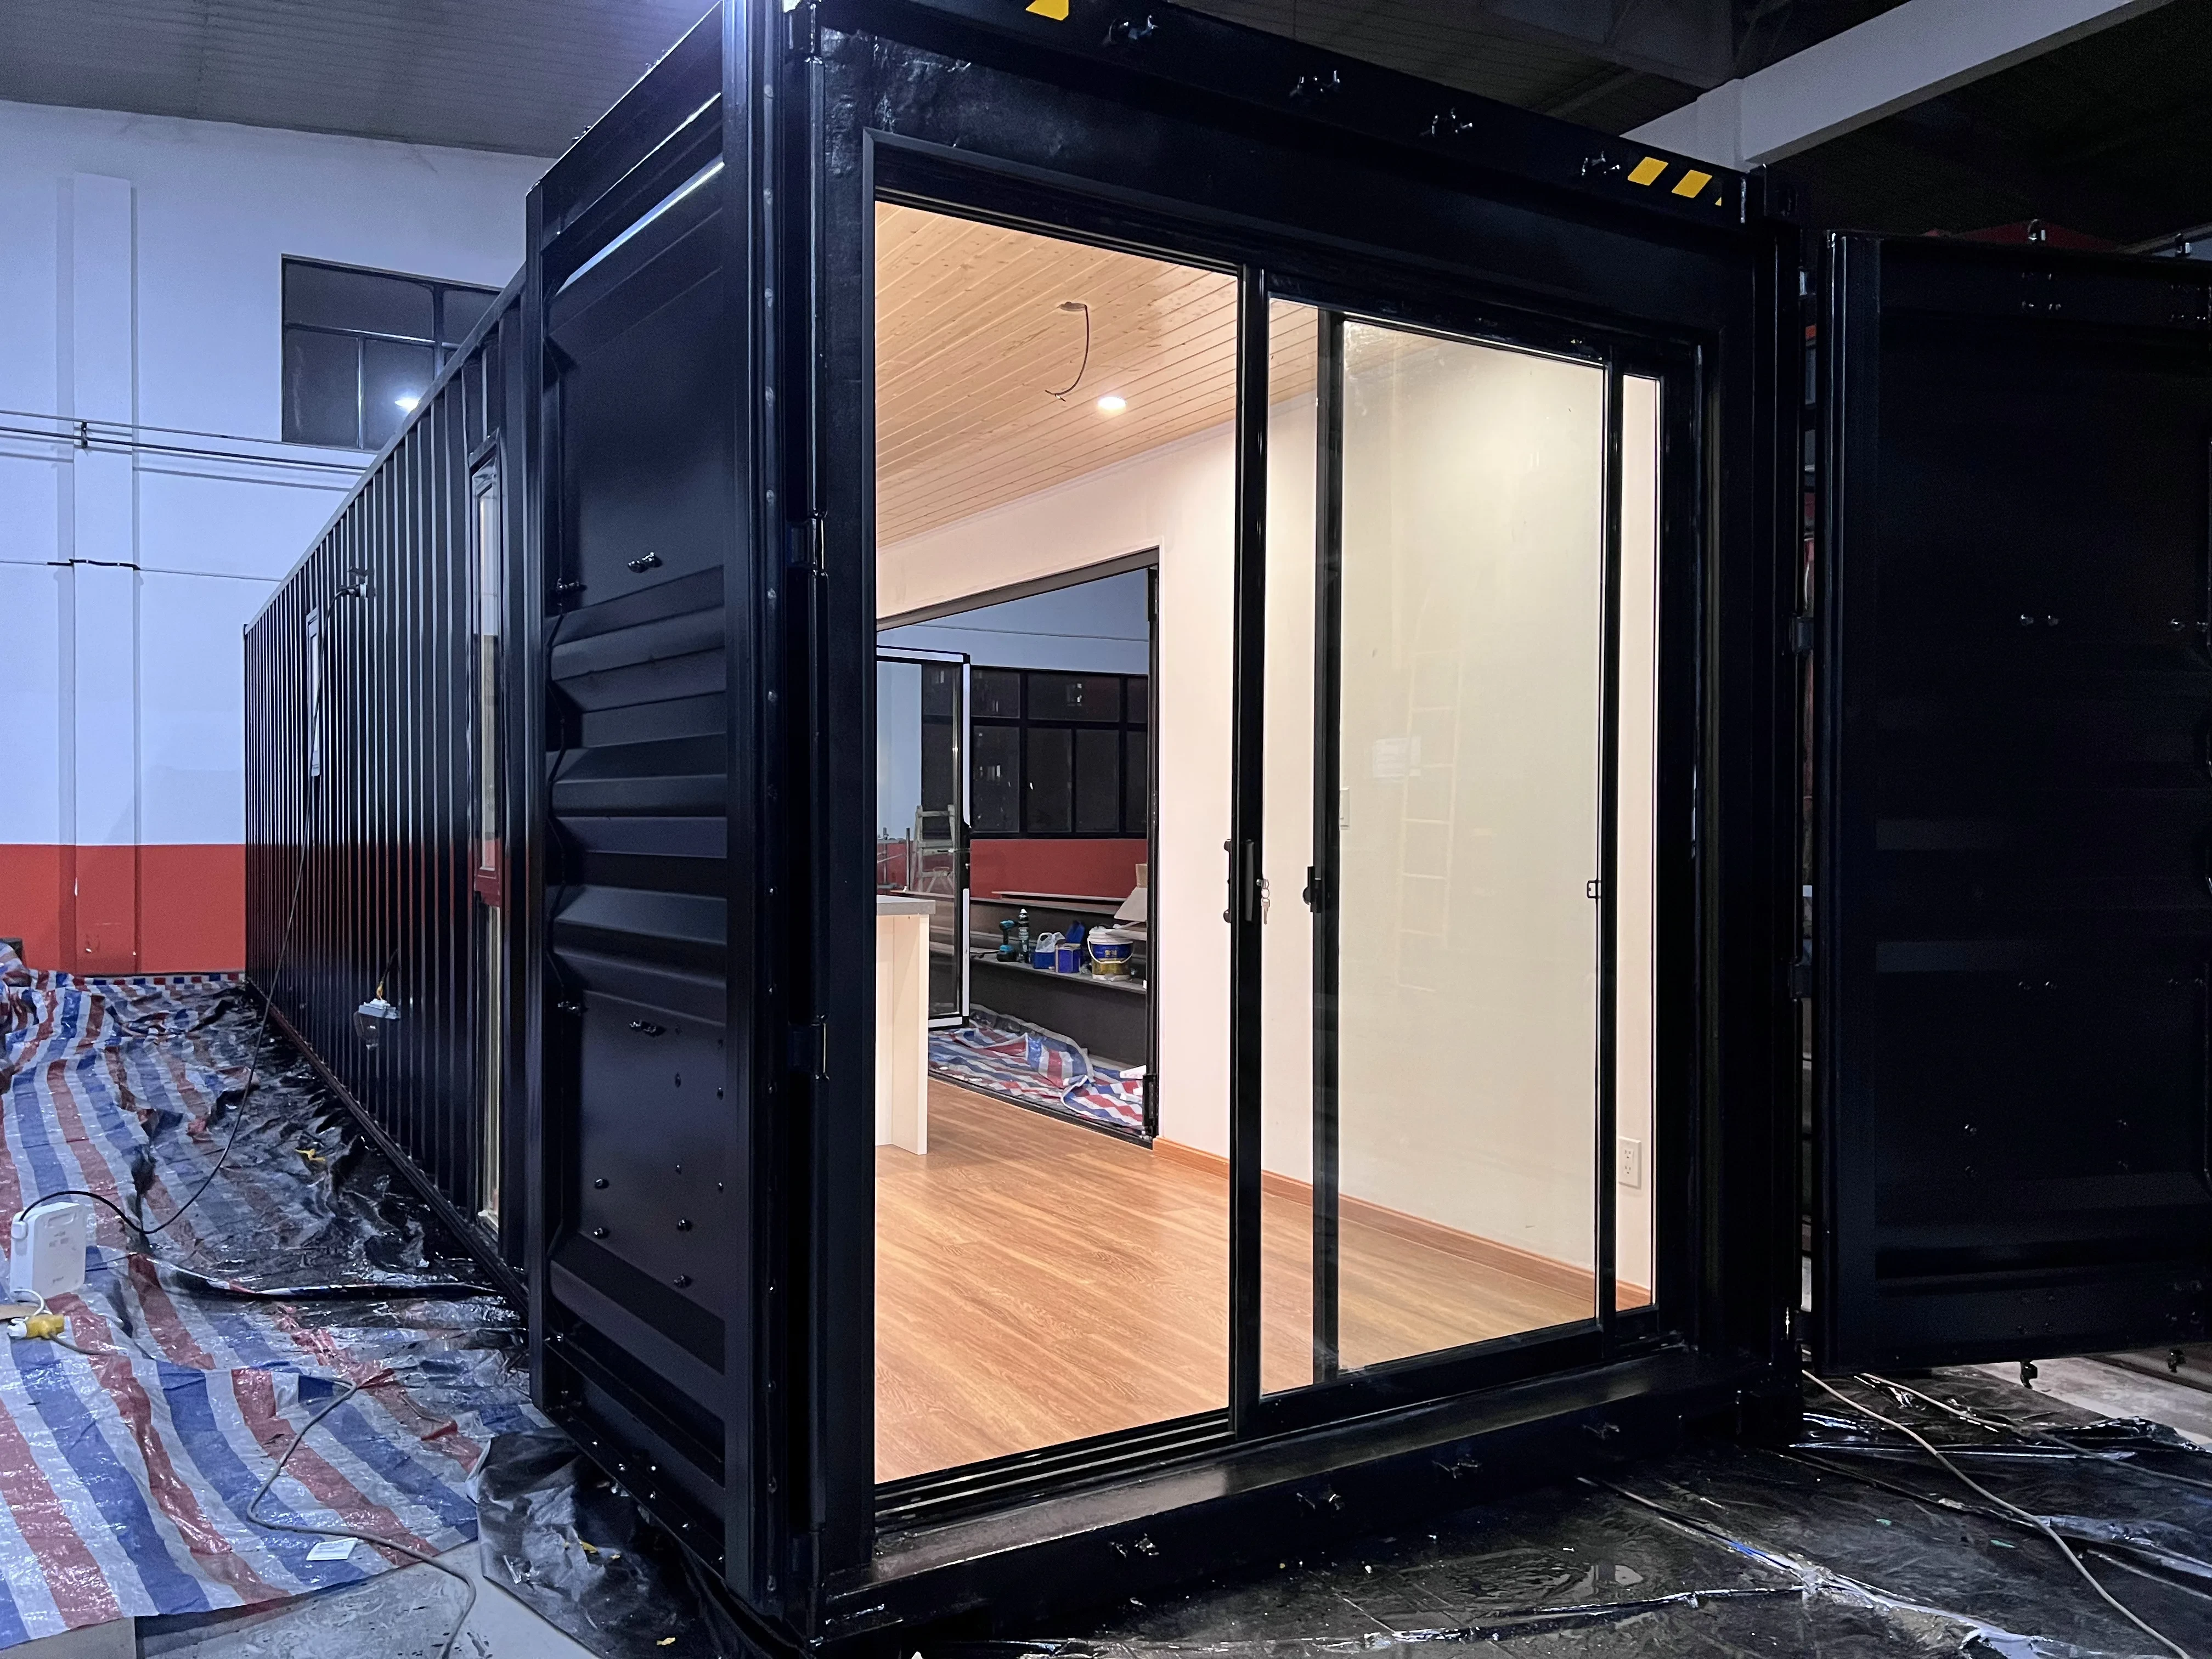 Transforming Shipping Containers into Unique Airbnb Stays